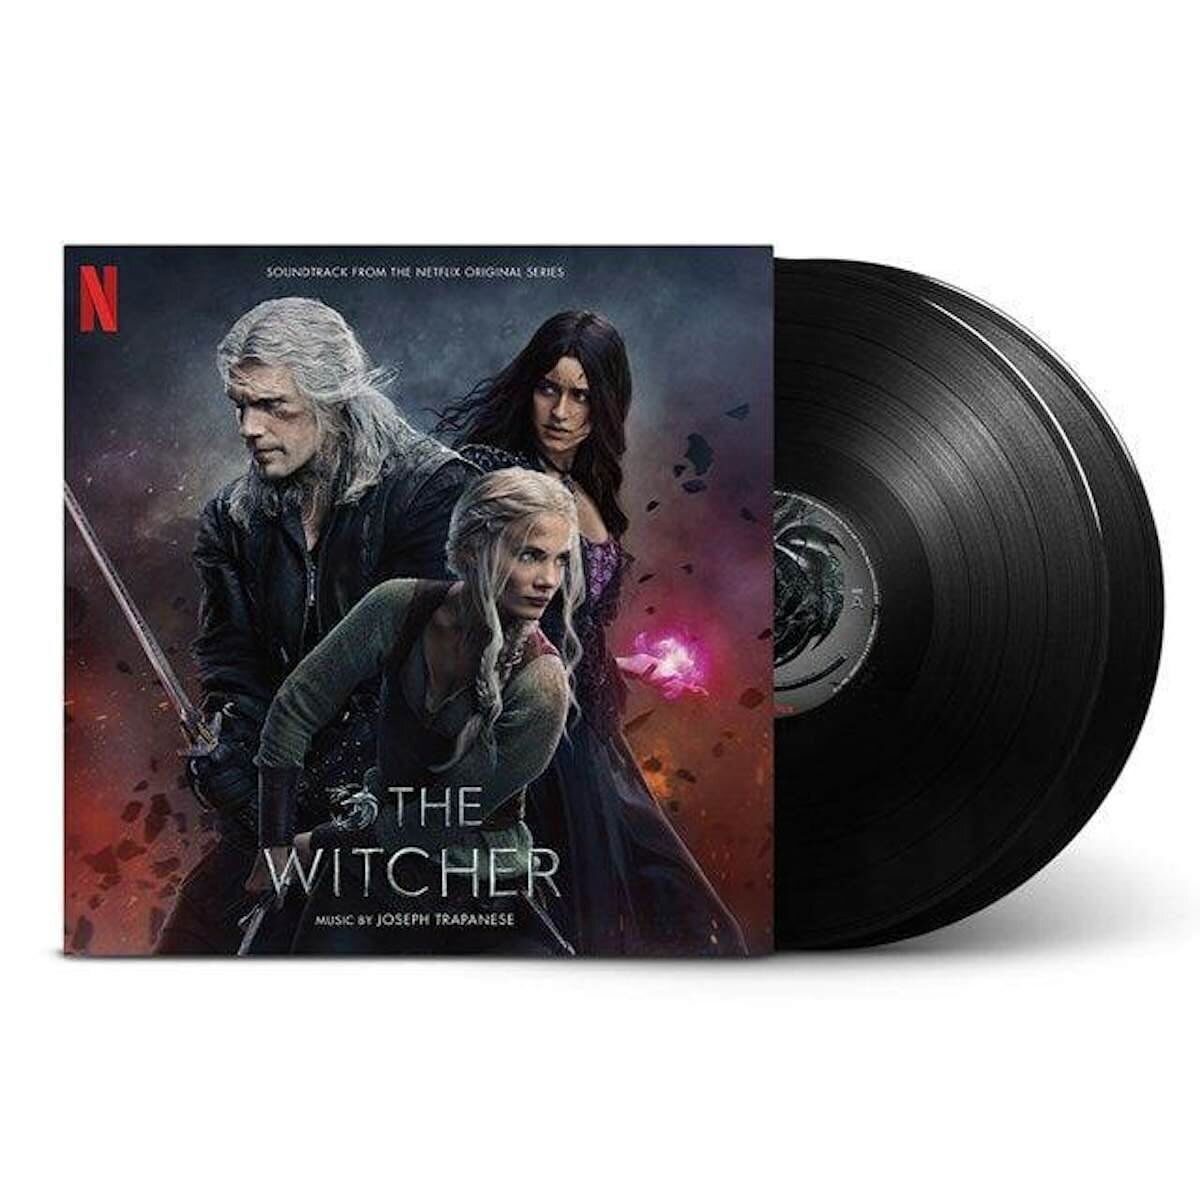 for those of you that need new material for your vinyl only minimal techno sets.
The Witcher: Season 3 soundtrack is available! Link in bio 💽🐺
&hellip;
#filmmusic #thewitcher #geralt #soundtrack #fantasy #musiconvinyl #records #ost #filmcomposer